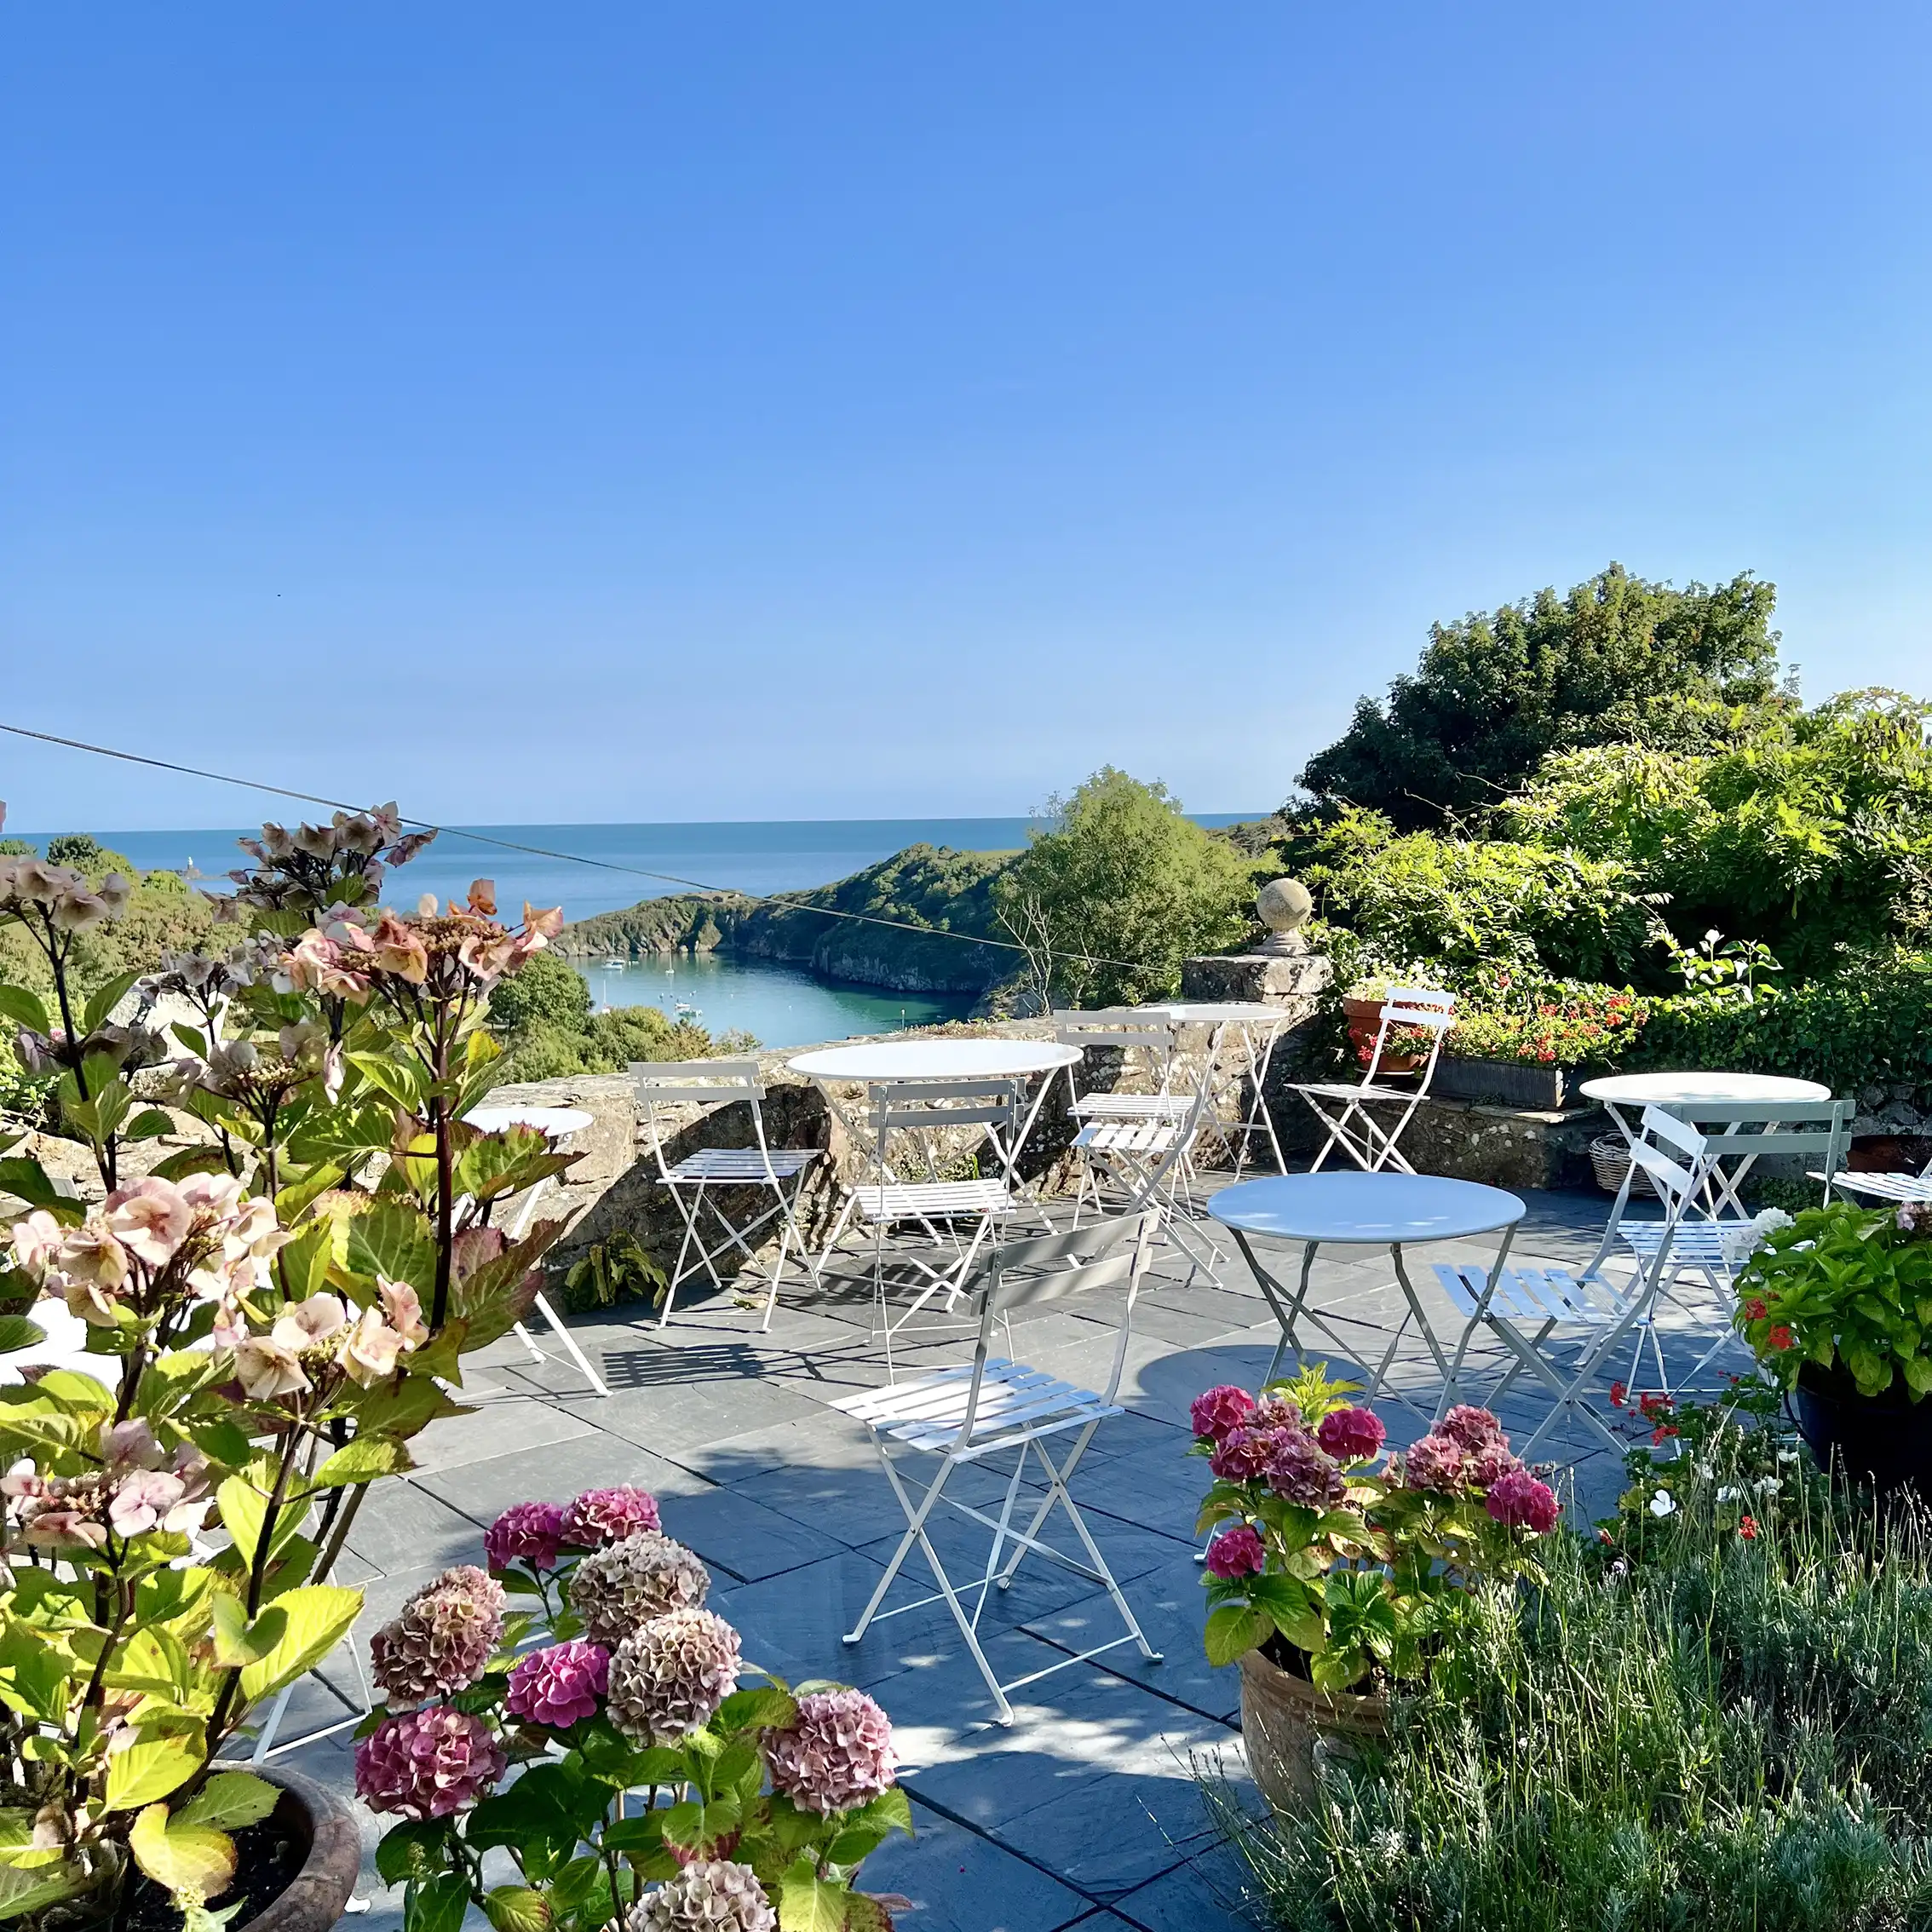 Our private breakfast eraace with views to Fishguard Bay and beyond.